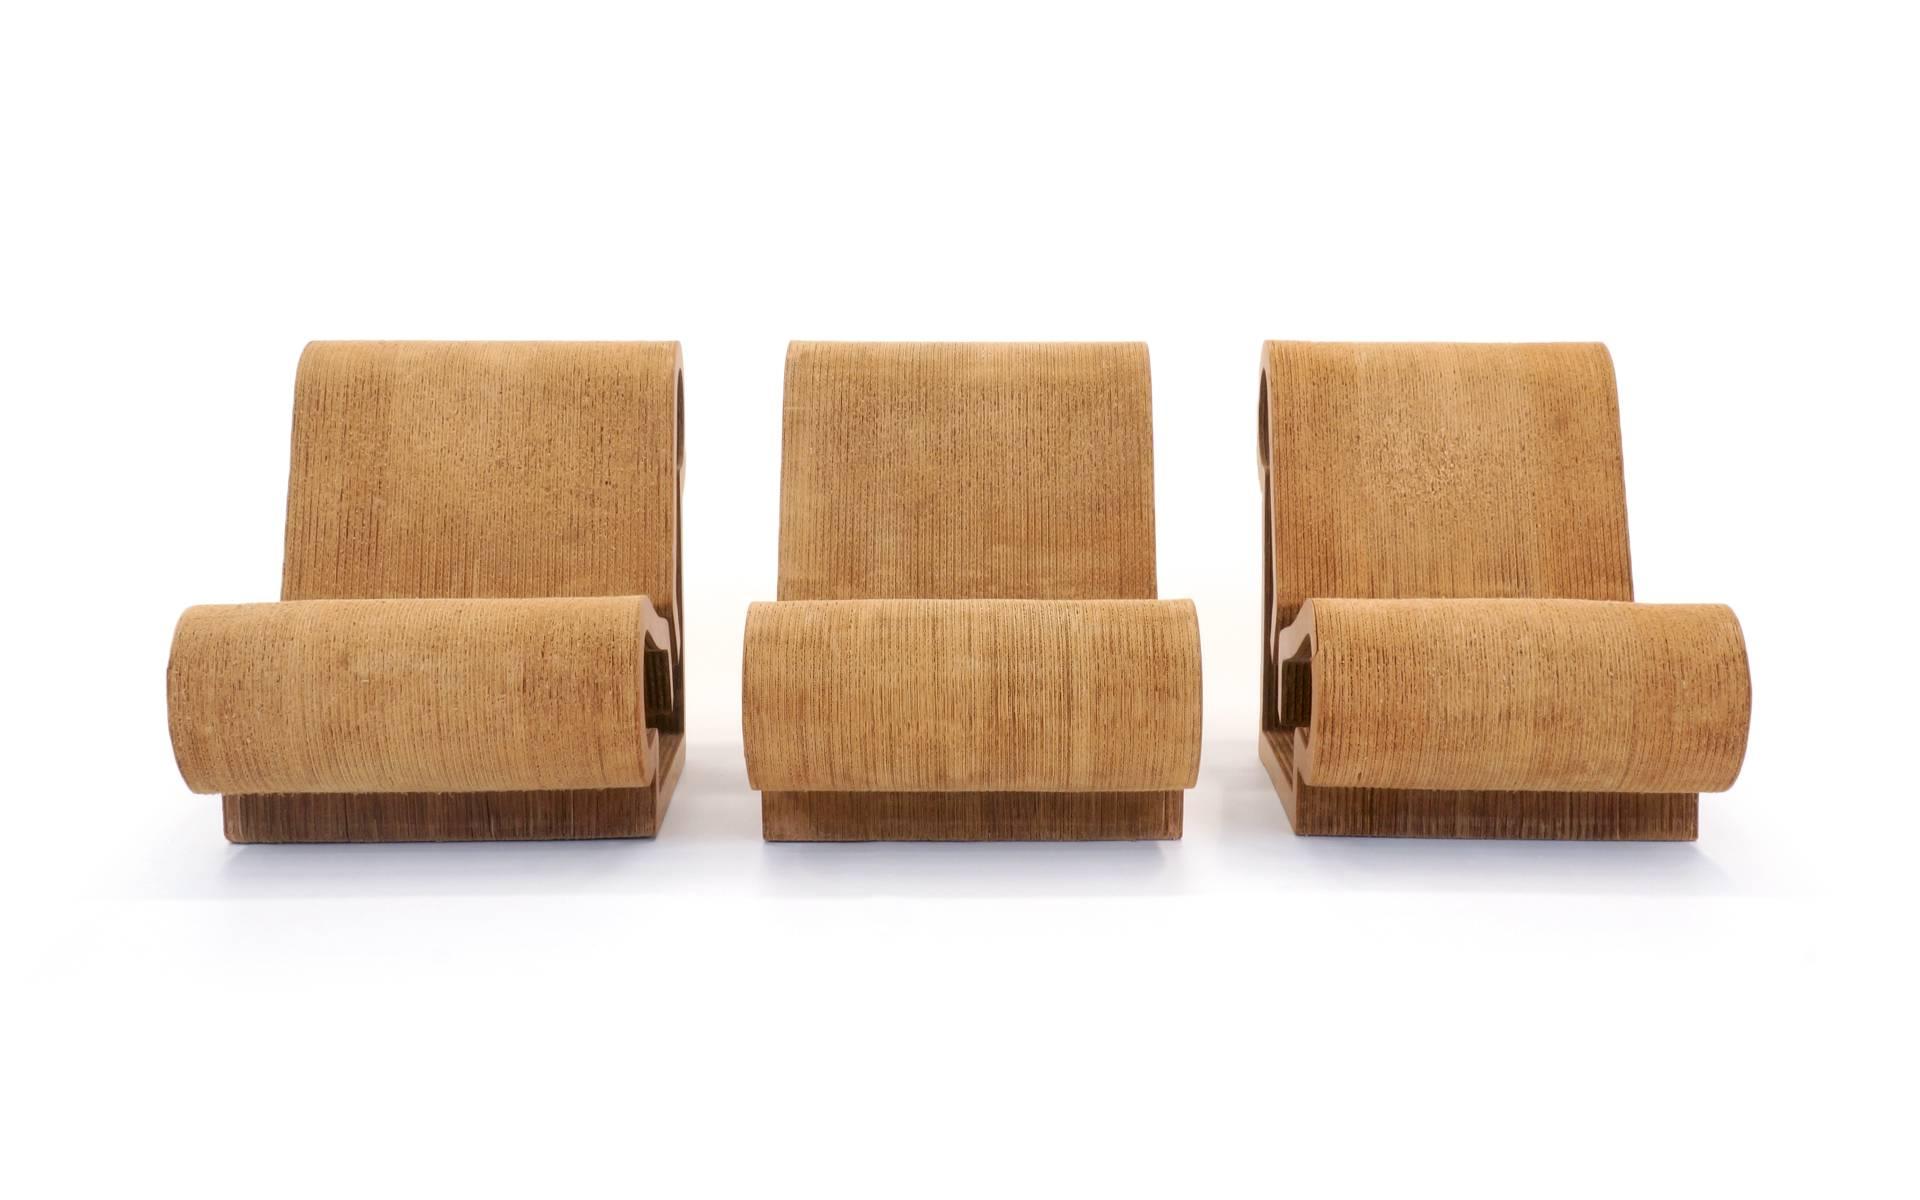 Buy one, two or all three of these iconic chairs designed by Frank Gehry for Easy Edges. Made of industrial corrugated cardboard and Masonite. 